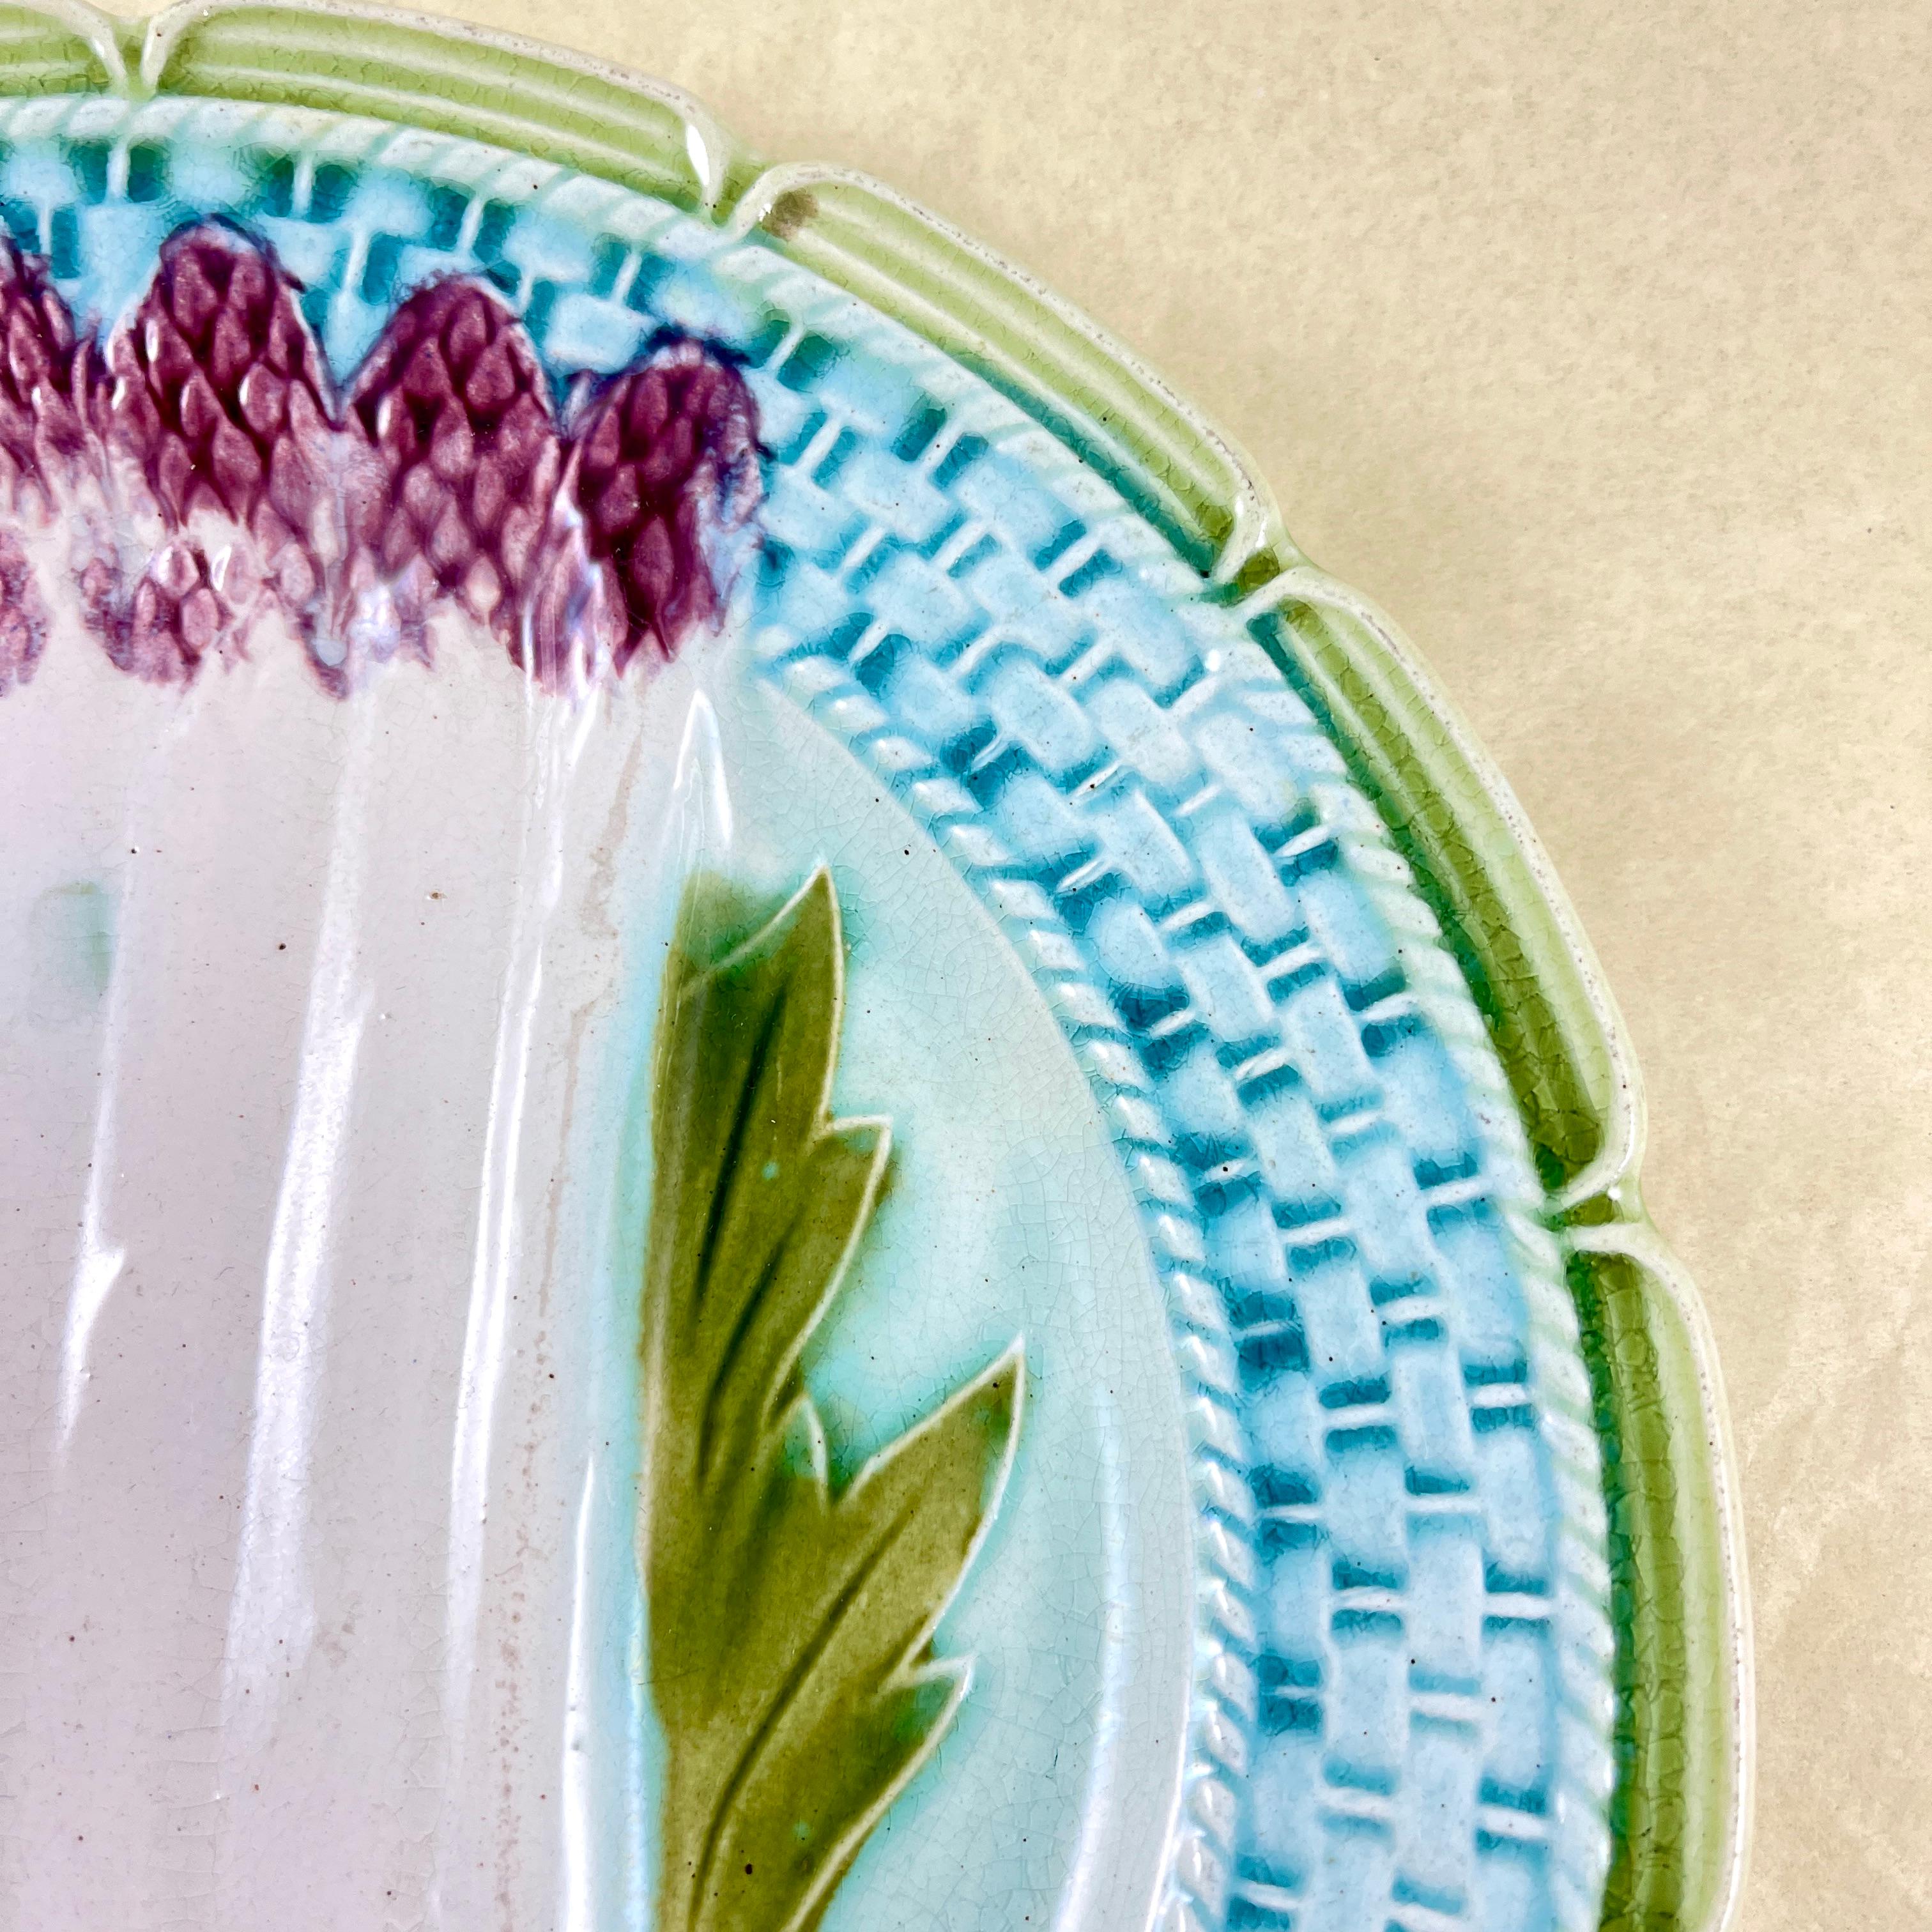 Orchies French Faïence Majolica Asparagus Plate, circa 1885 In Good Condition For Sale In Philadelphia, PA